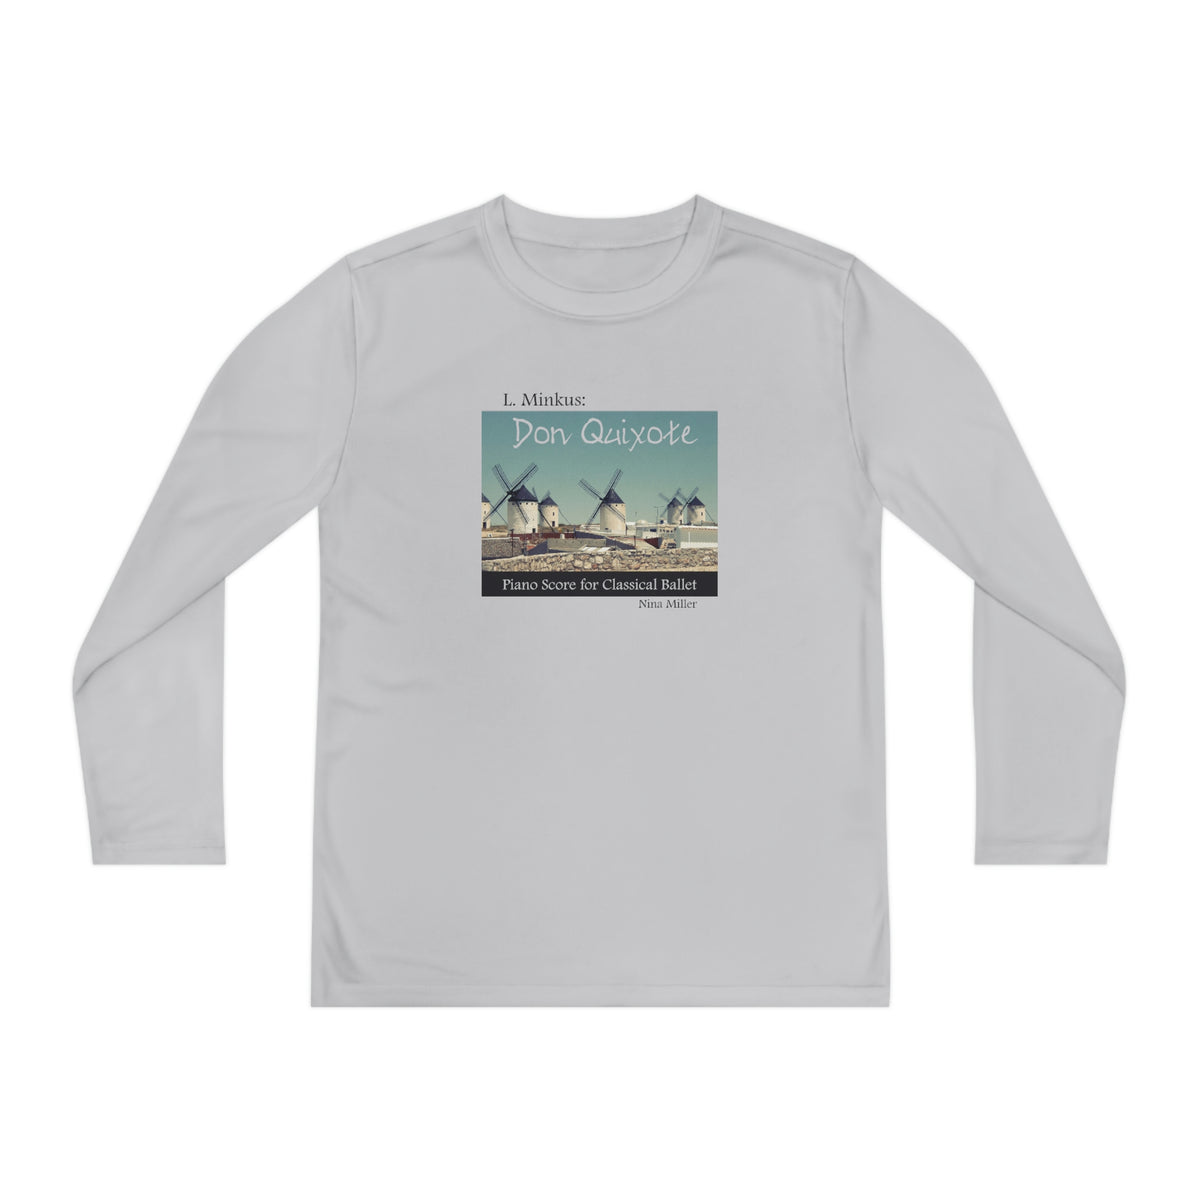 Don Quixote Score 2 - Youth Long Sleeve Competitor Tee